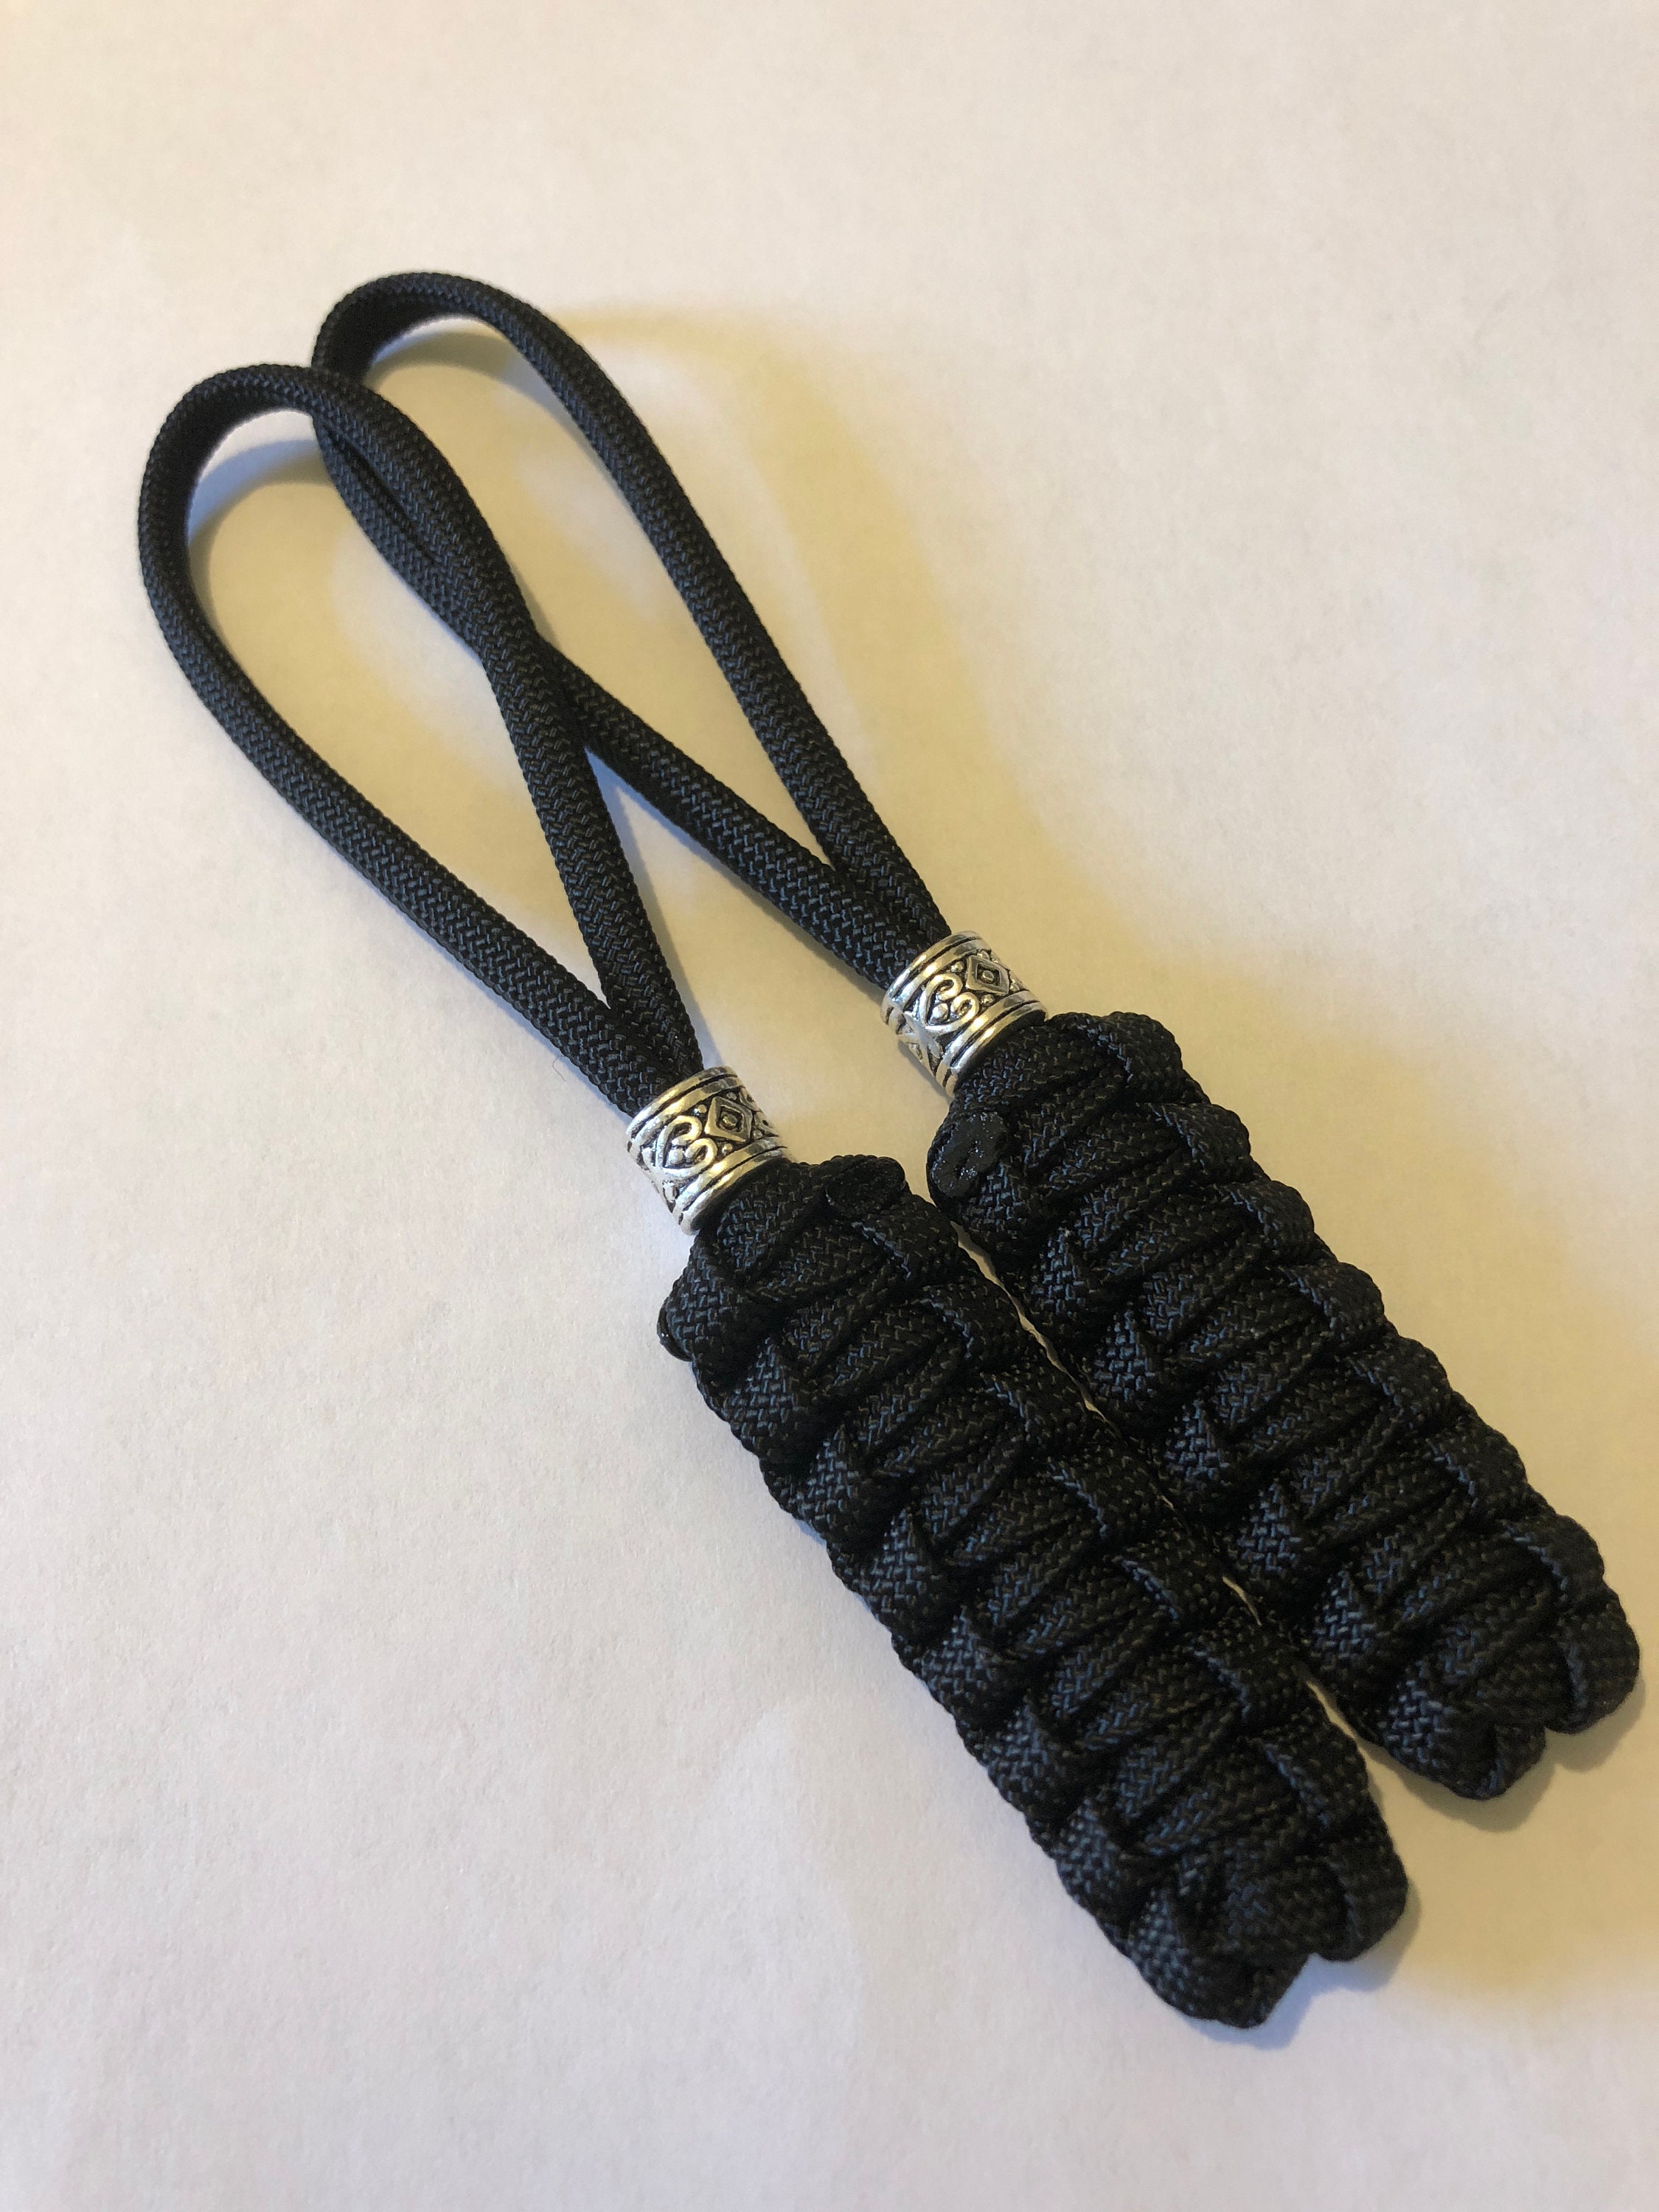 550 Paracord Knife Lanyard 2pk Shorties Gutted Jet Black Cord With